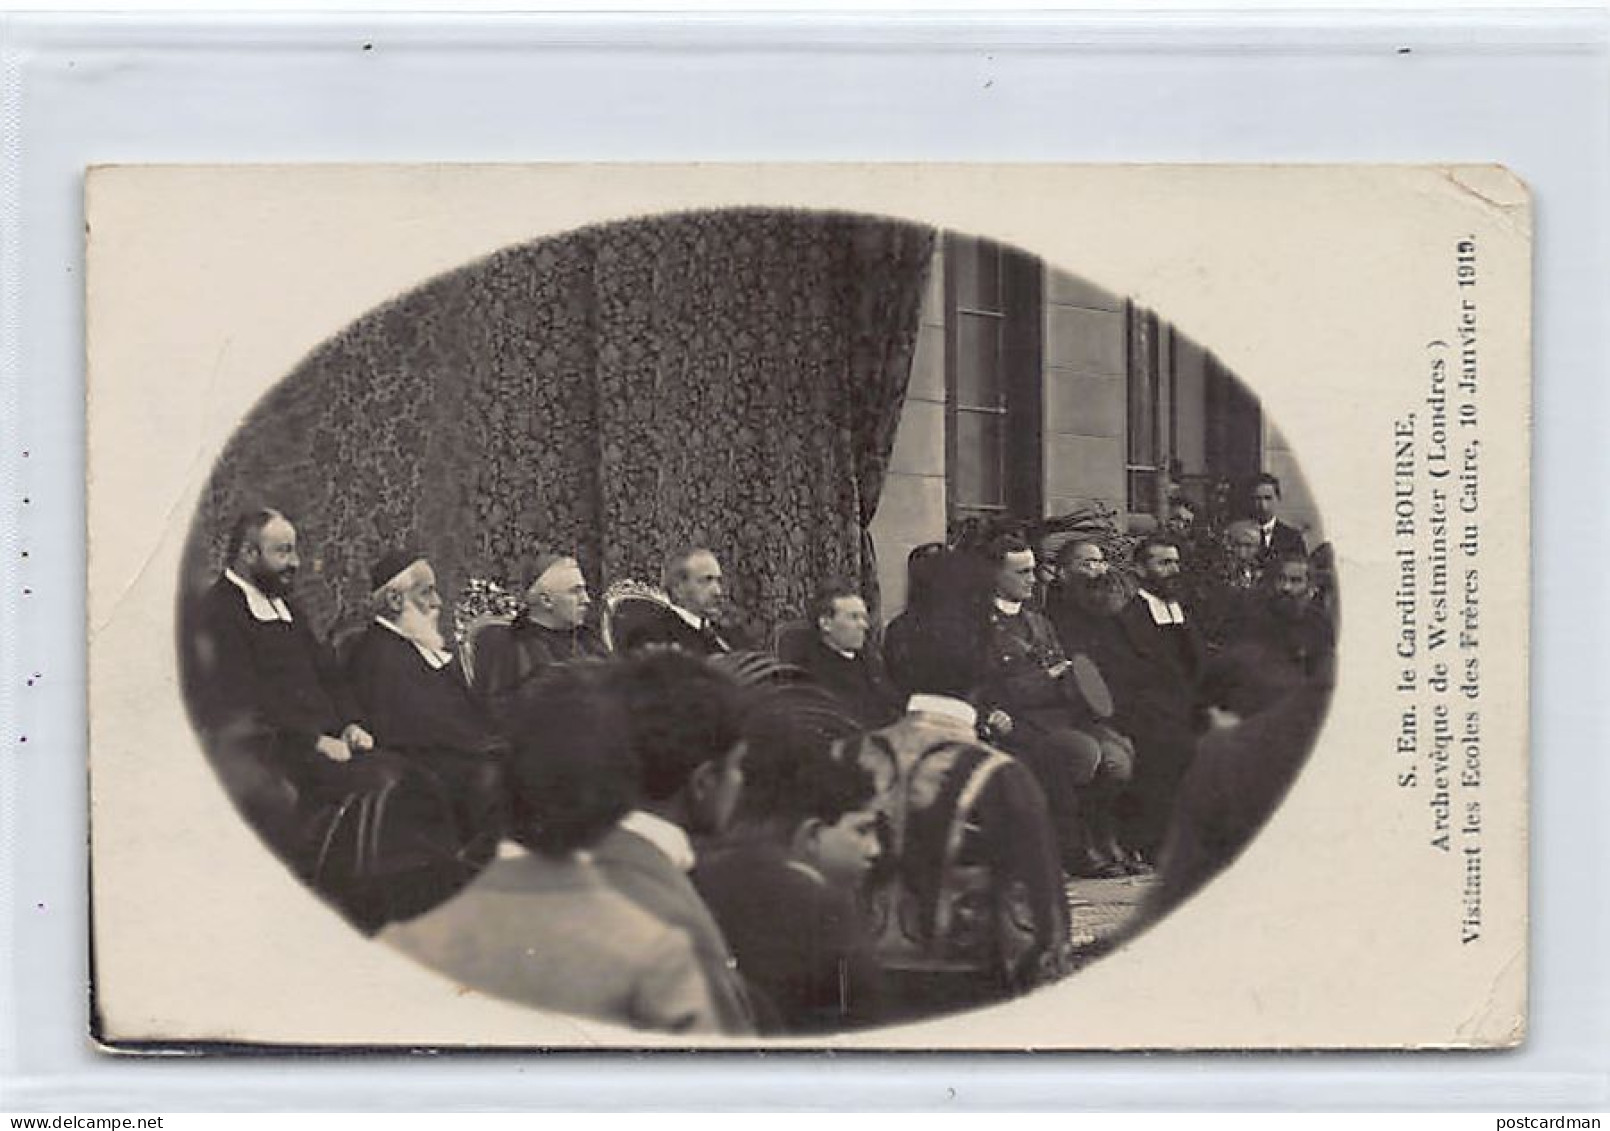 Egypt - CAIRO - H.E. Cardinal Bourne, Archbishop Of Westminster, Visiting The Ecole Des Frères, 10 January 1919 - REAL P - El Cairo